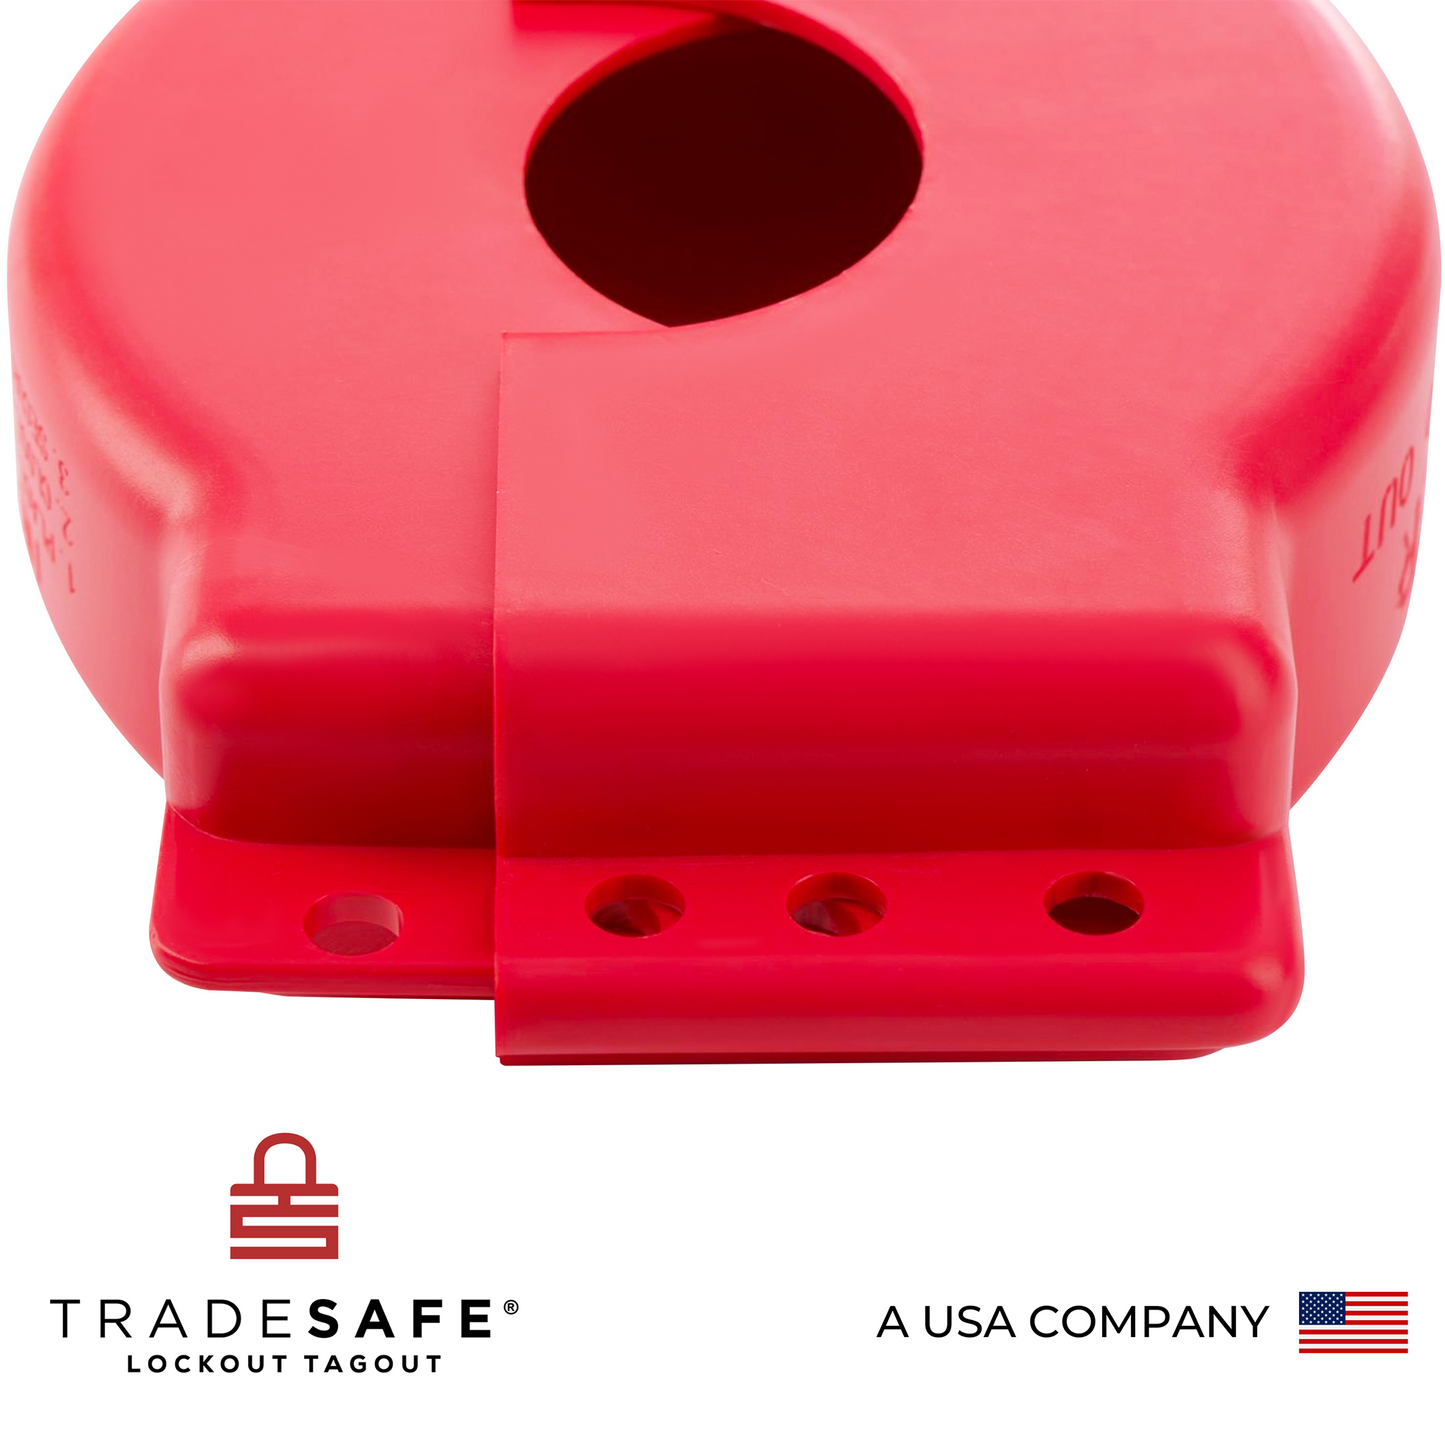 close up view of the padlock holes of a red gate valve lockout device